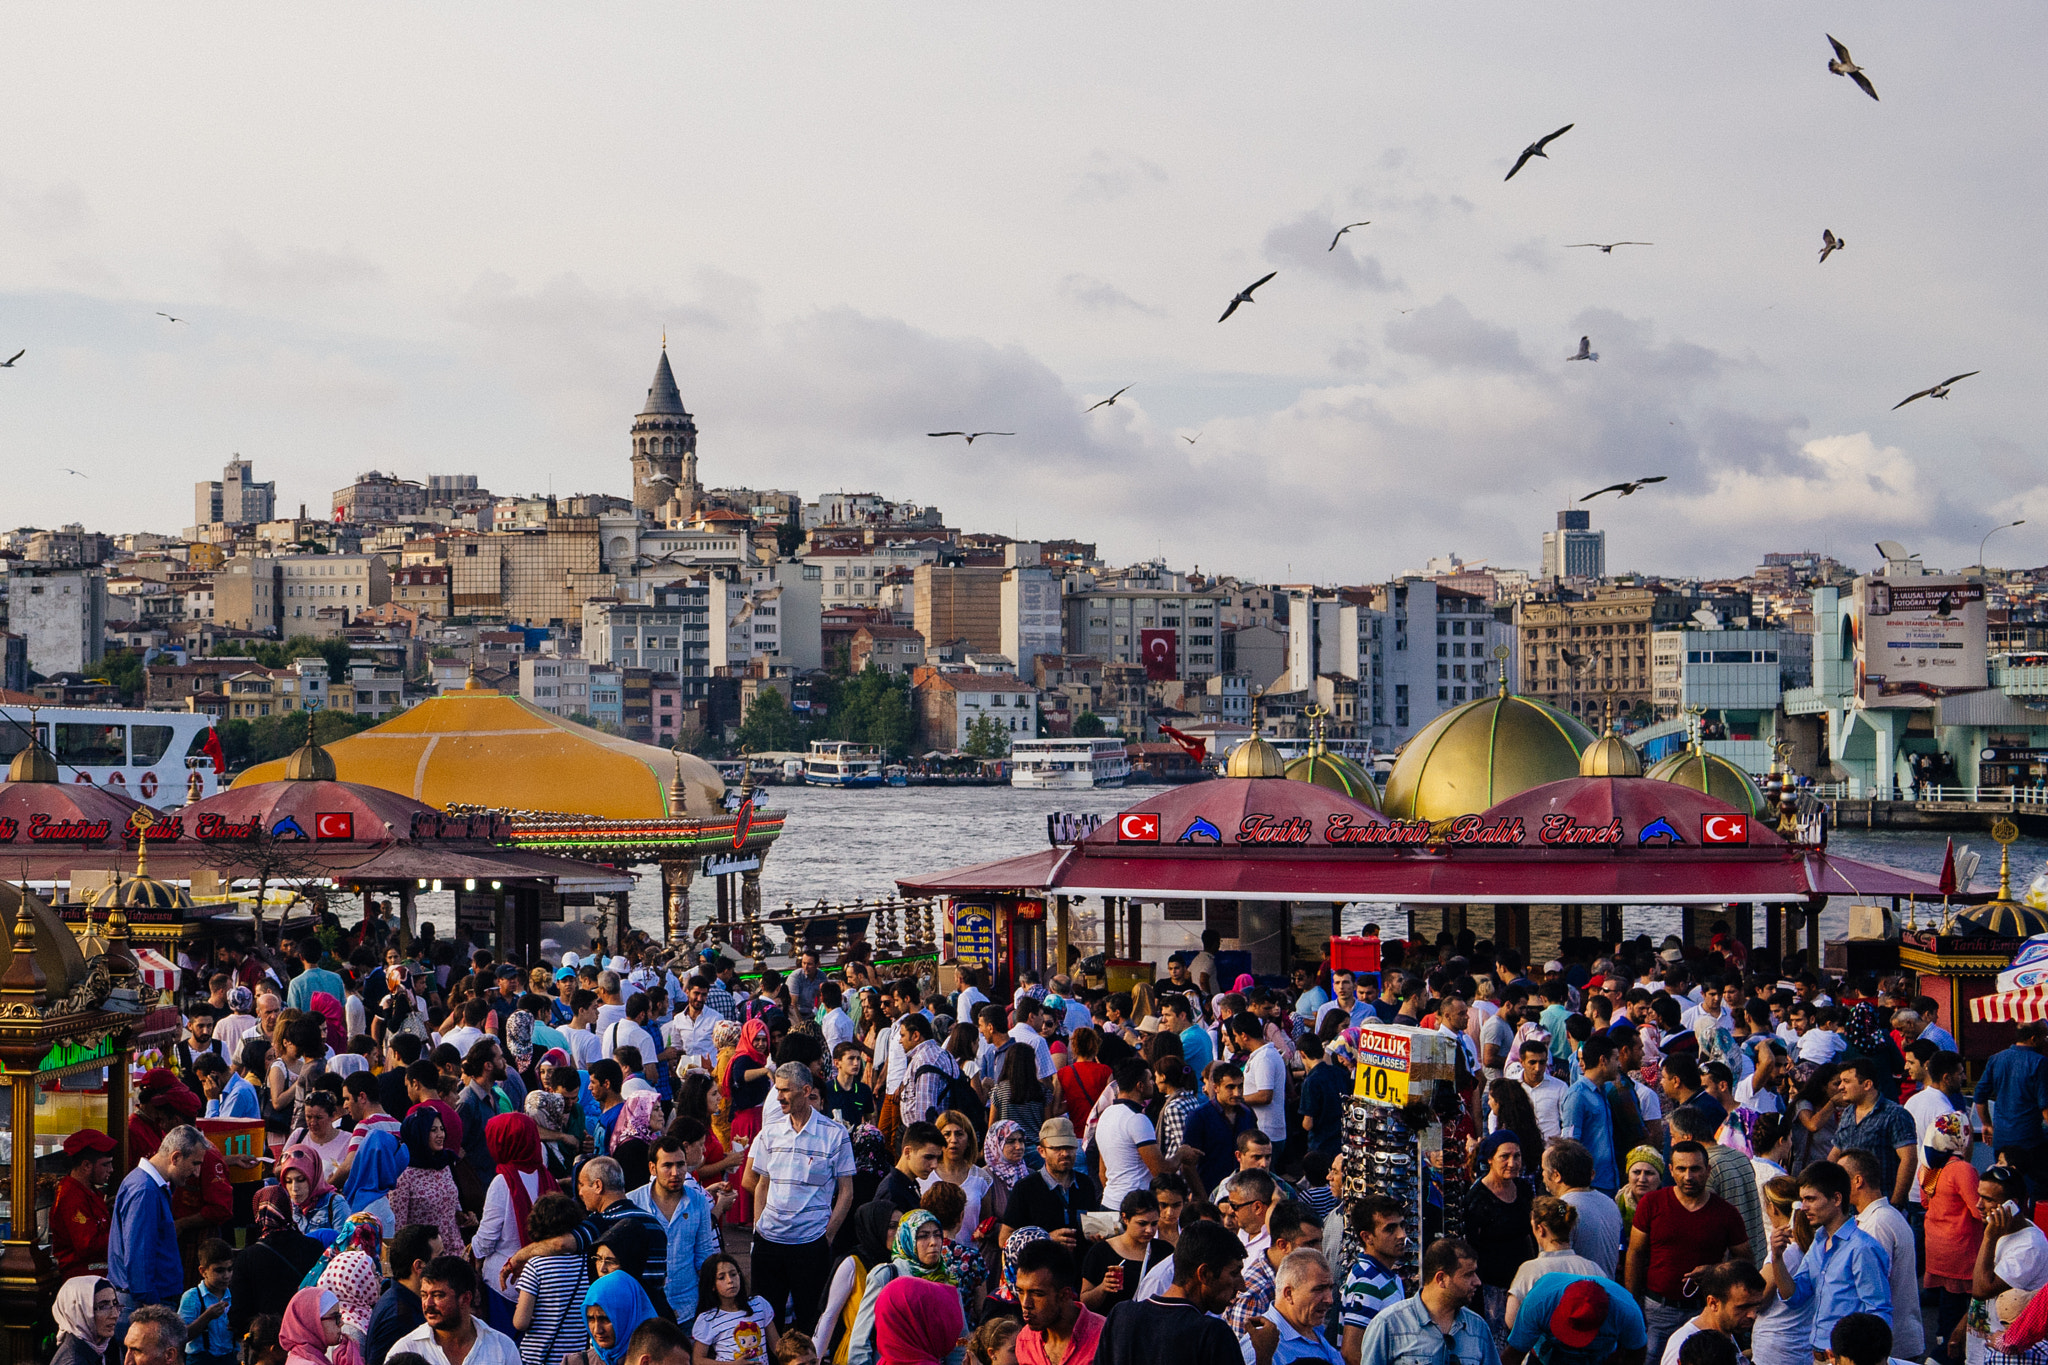 Sony a7 sample photo. Istanbul photography